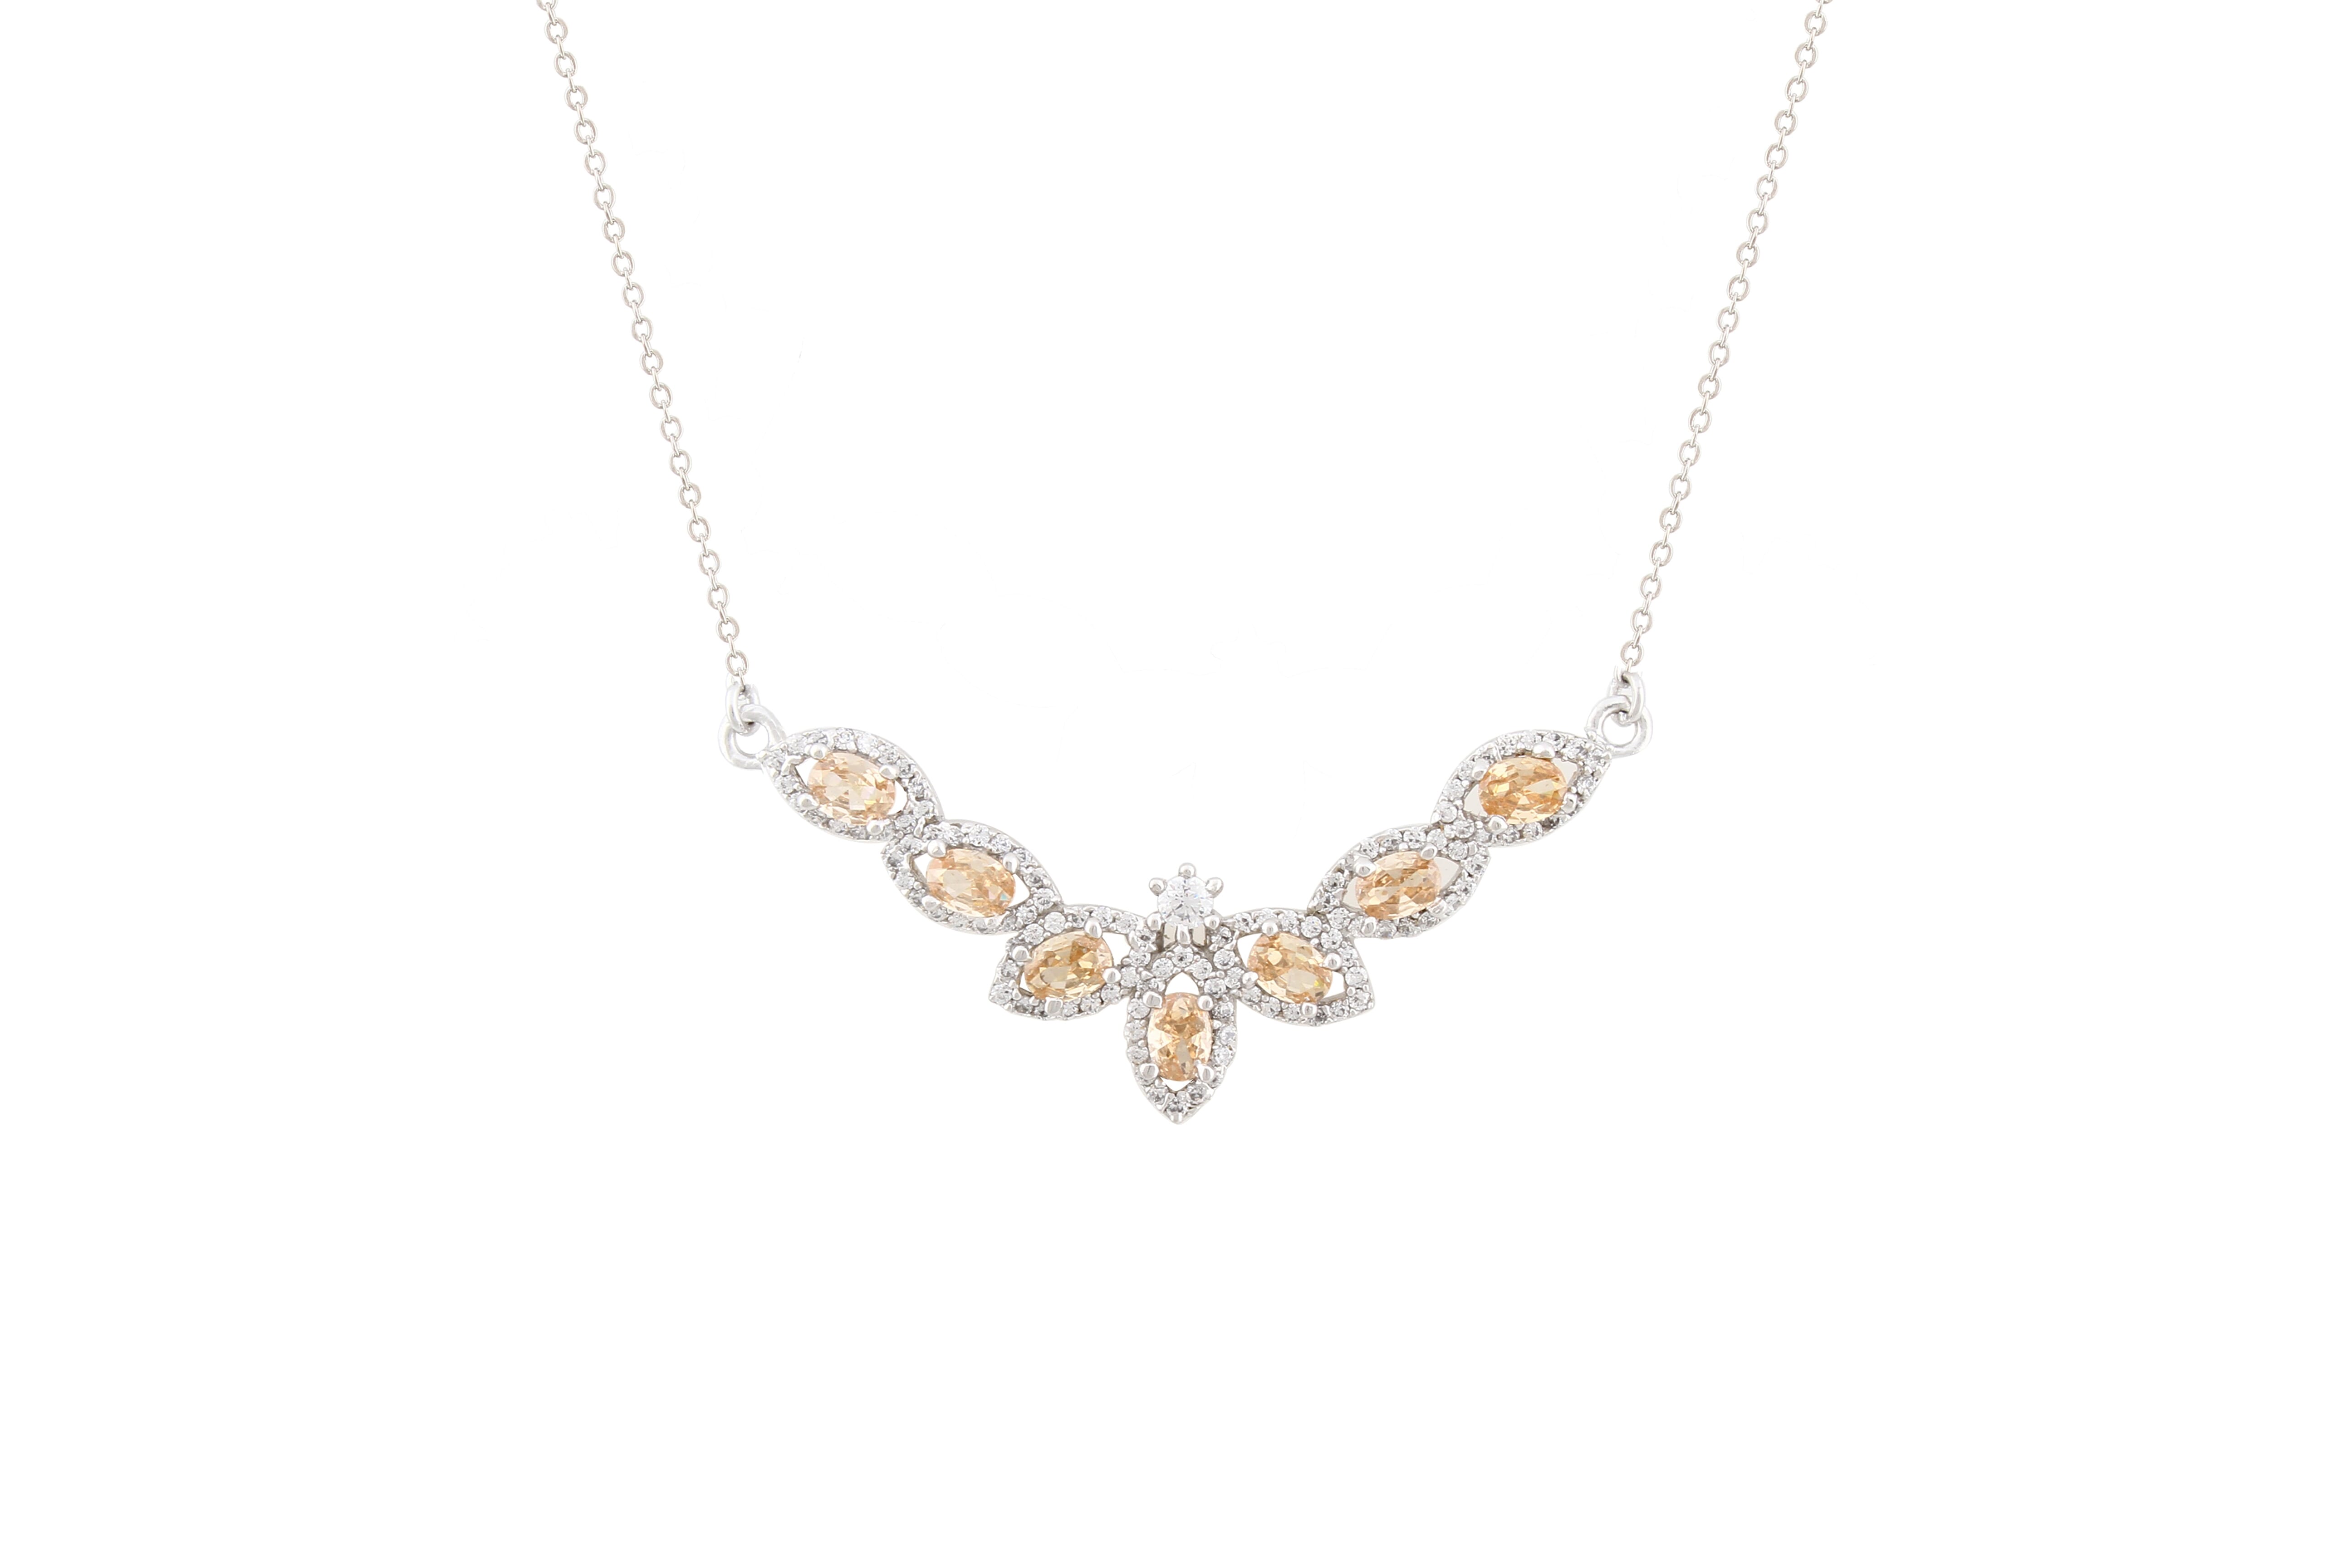 Asfour Crystal Chain Necklace Inlaid With Ligth Colorado Topaz Zircon In 925 Sterling Silver NA0007-LCT